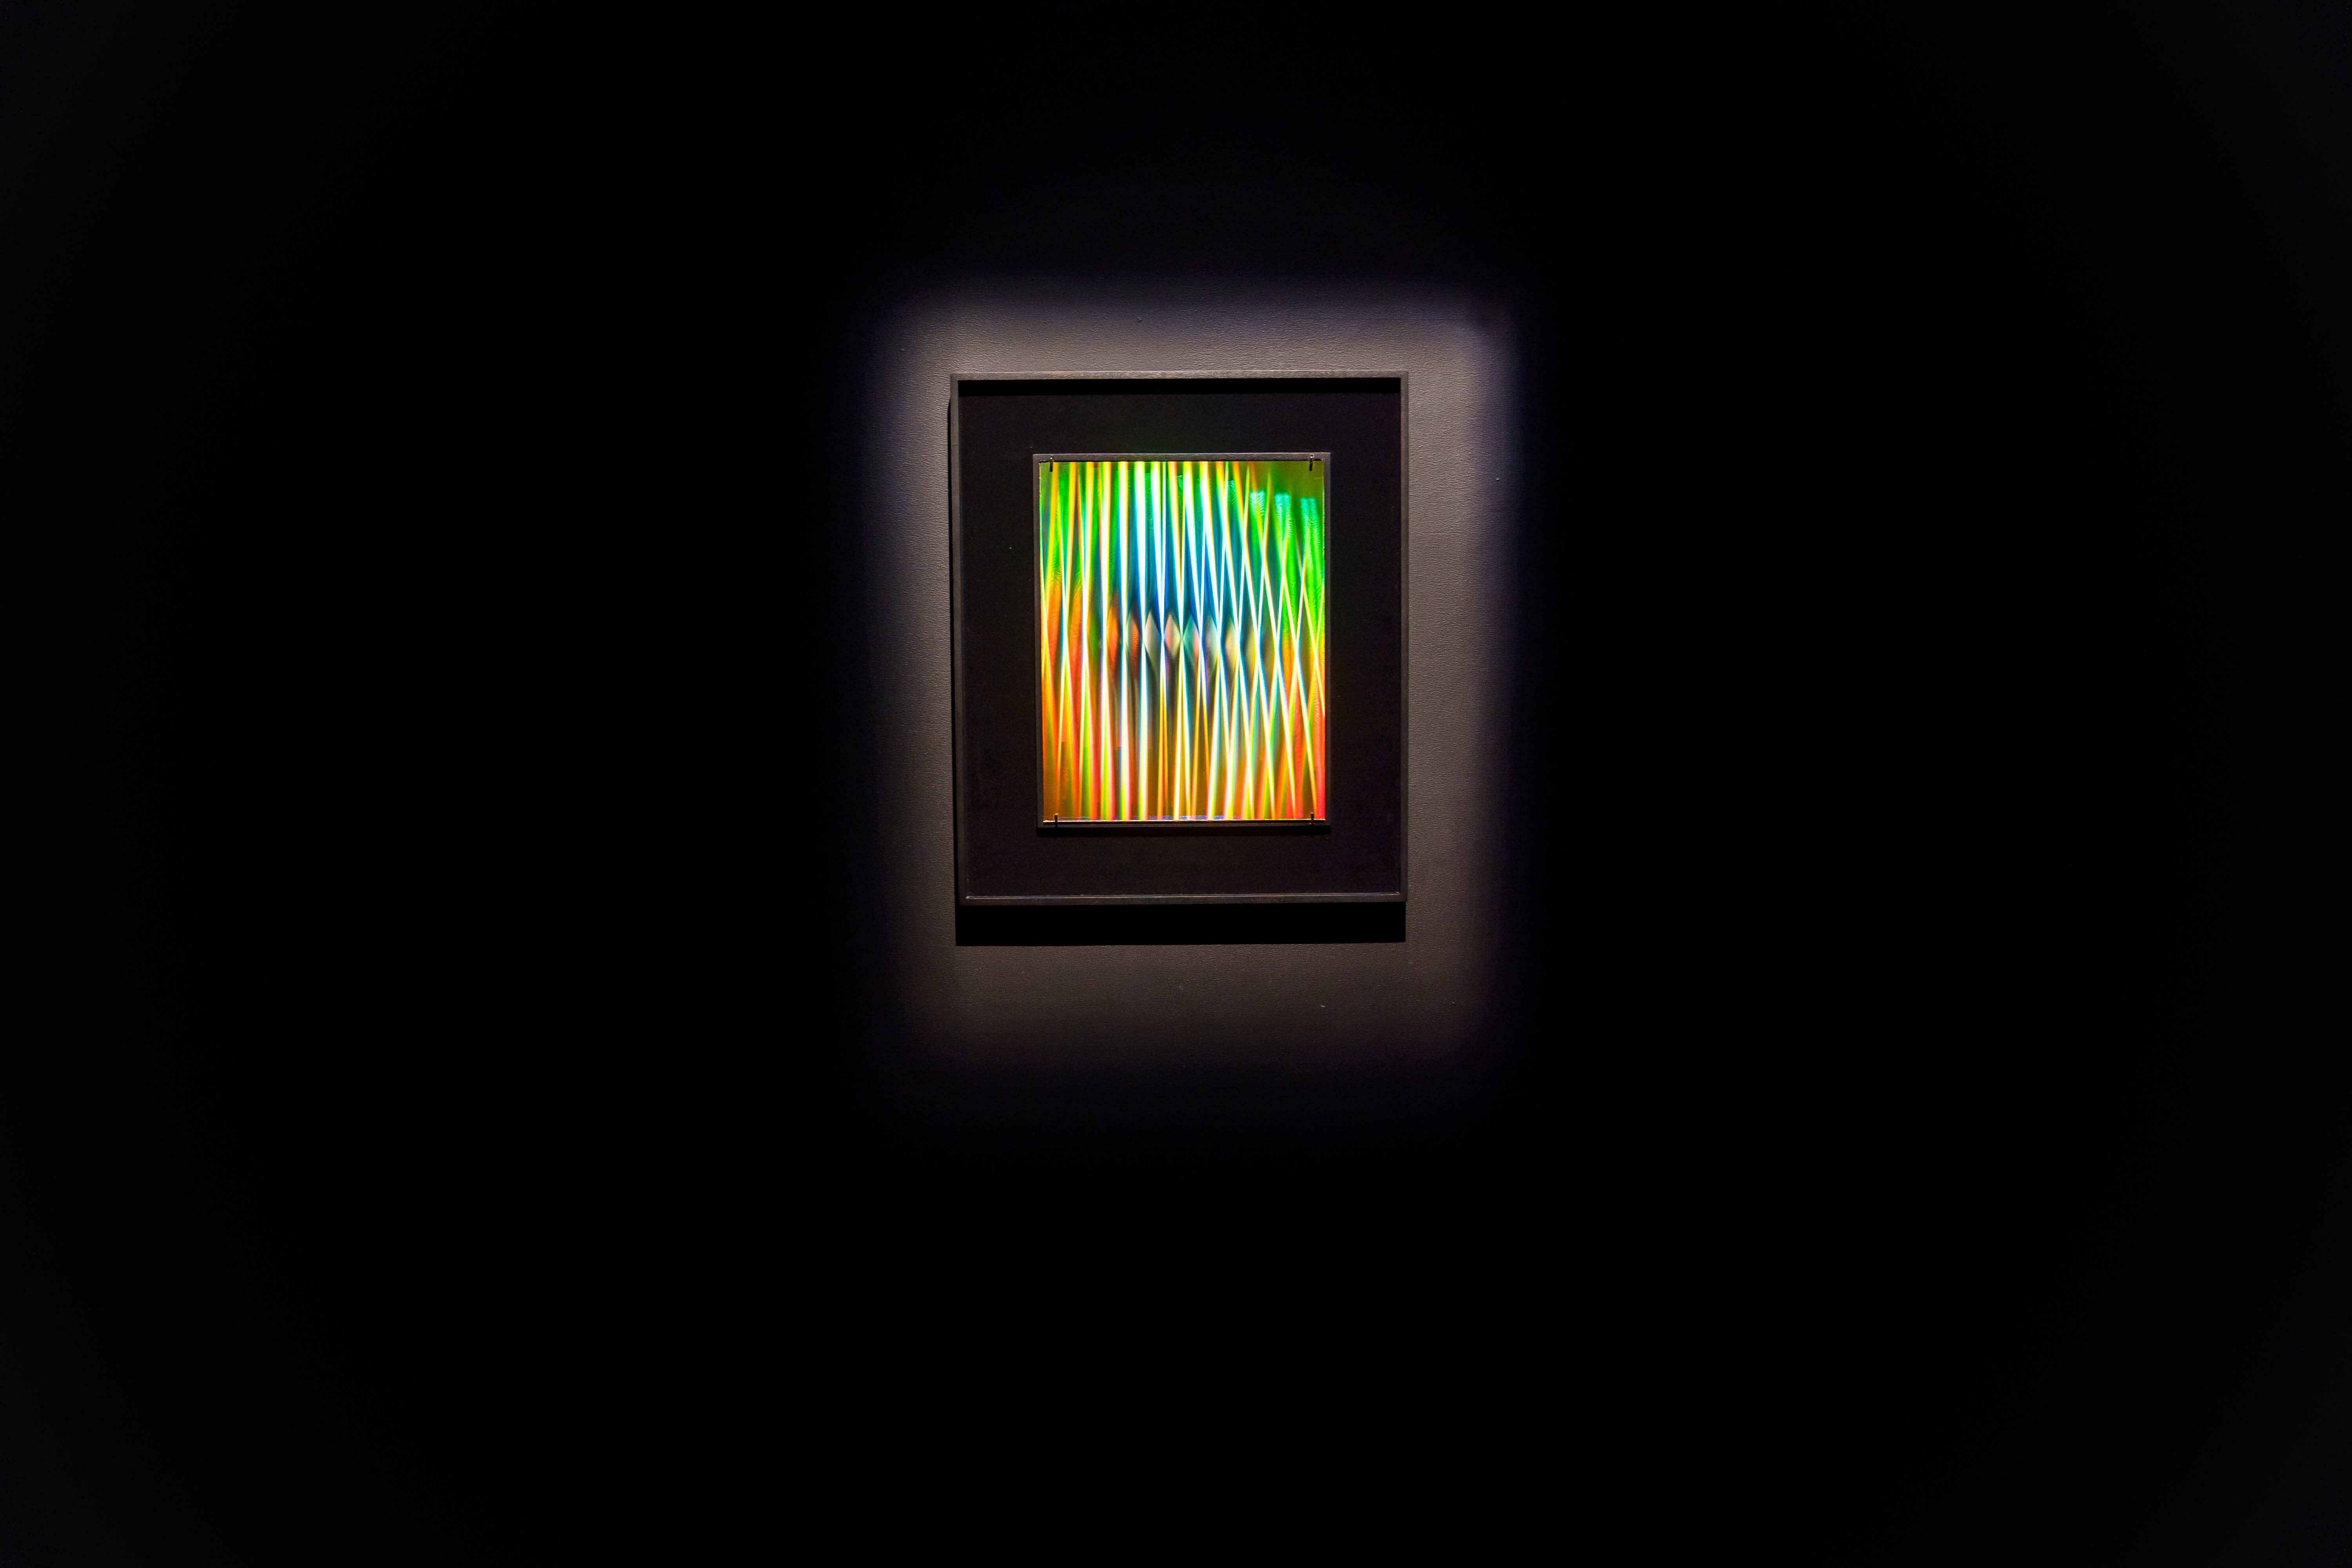 A piece from Gift Shop. A rainbow striped hologram in a black frame, hung on a black wall